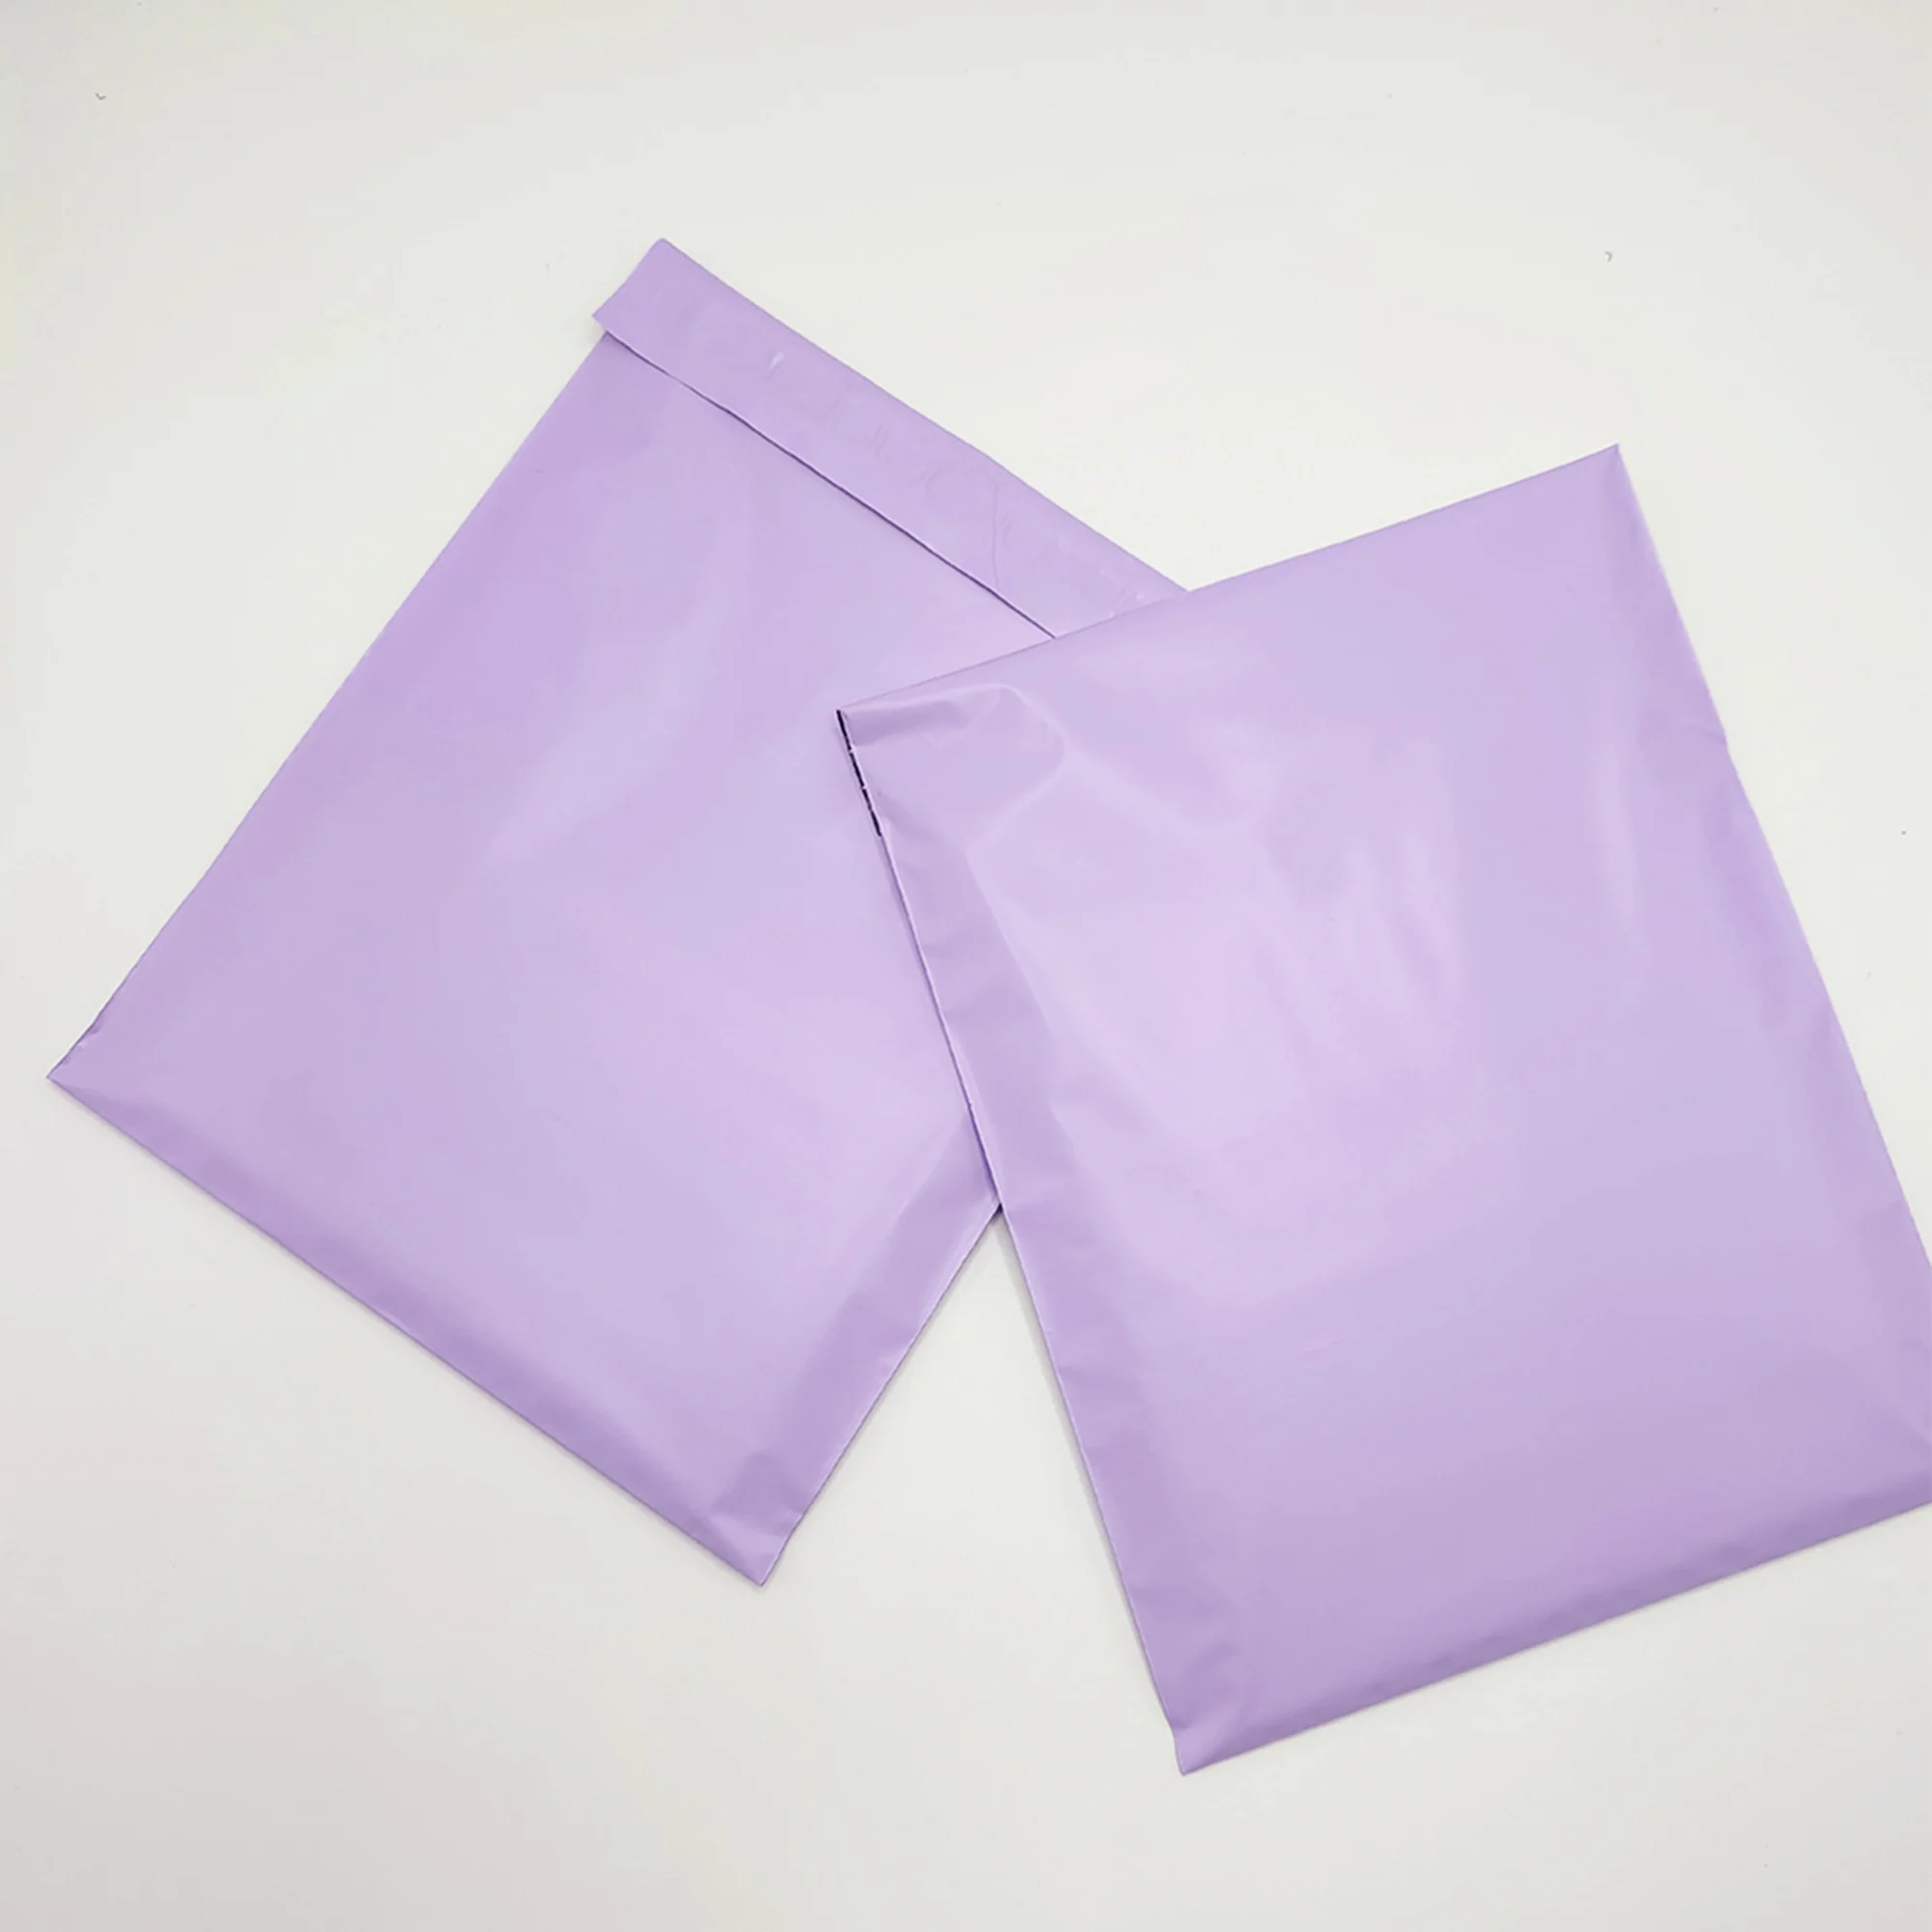 10pcs Purple Bags Self Adhesive Post Mailing Bags Package Mailer Glue Seal Postal Bag Gift Bags Courier Storage Shipping bags 100pcs pink poly mailer self adhesive post mailing package mailer glue seal postal bag gift bags courier storage shipping bags